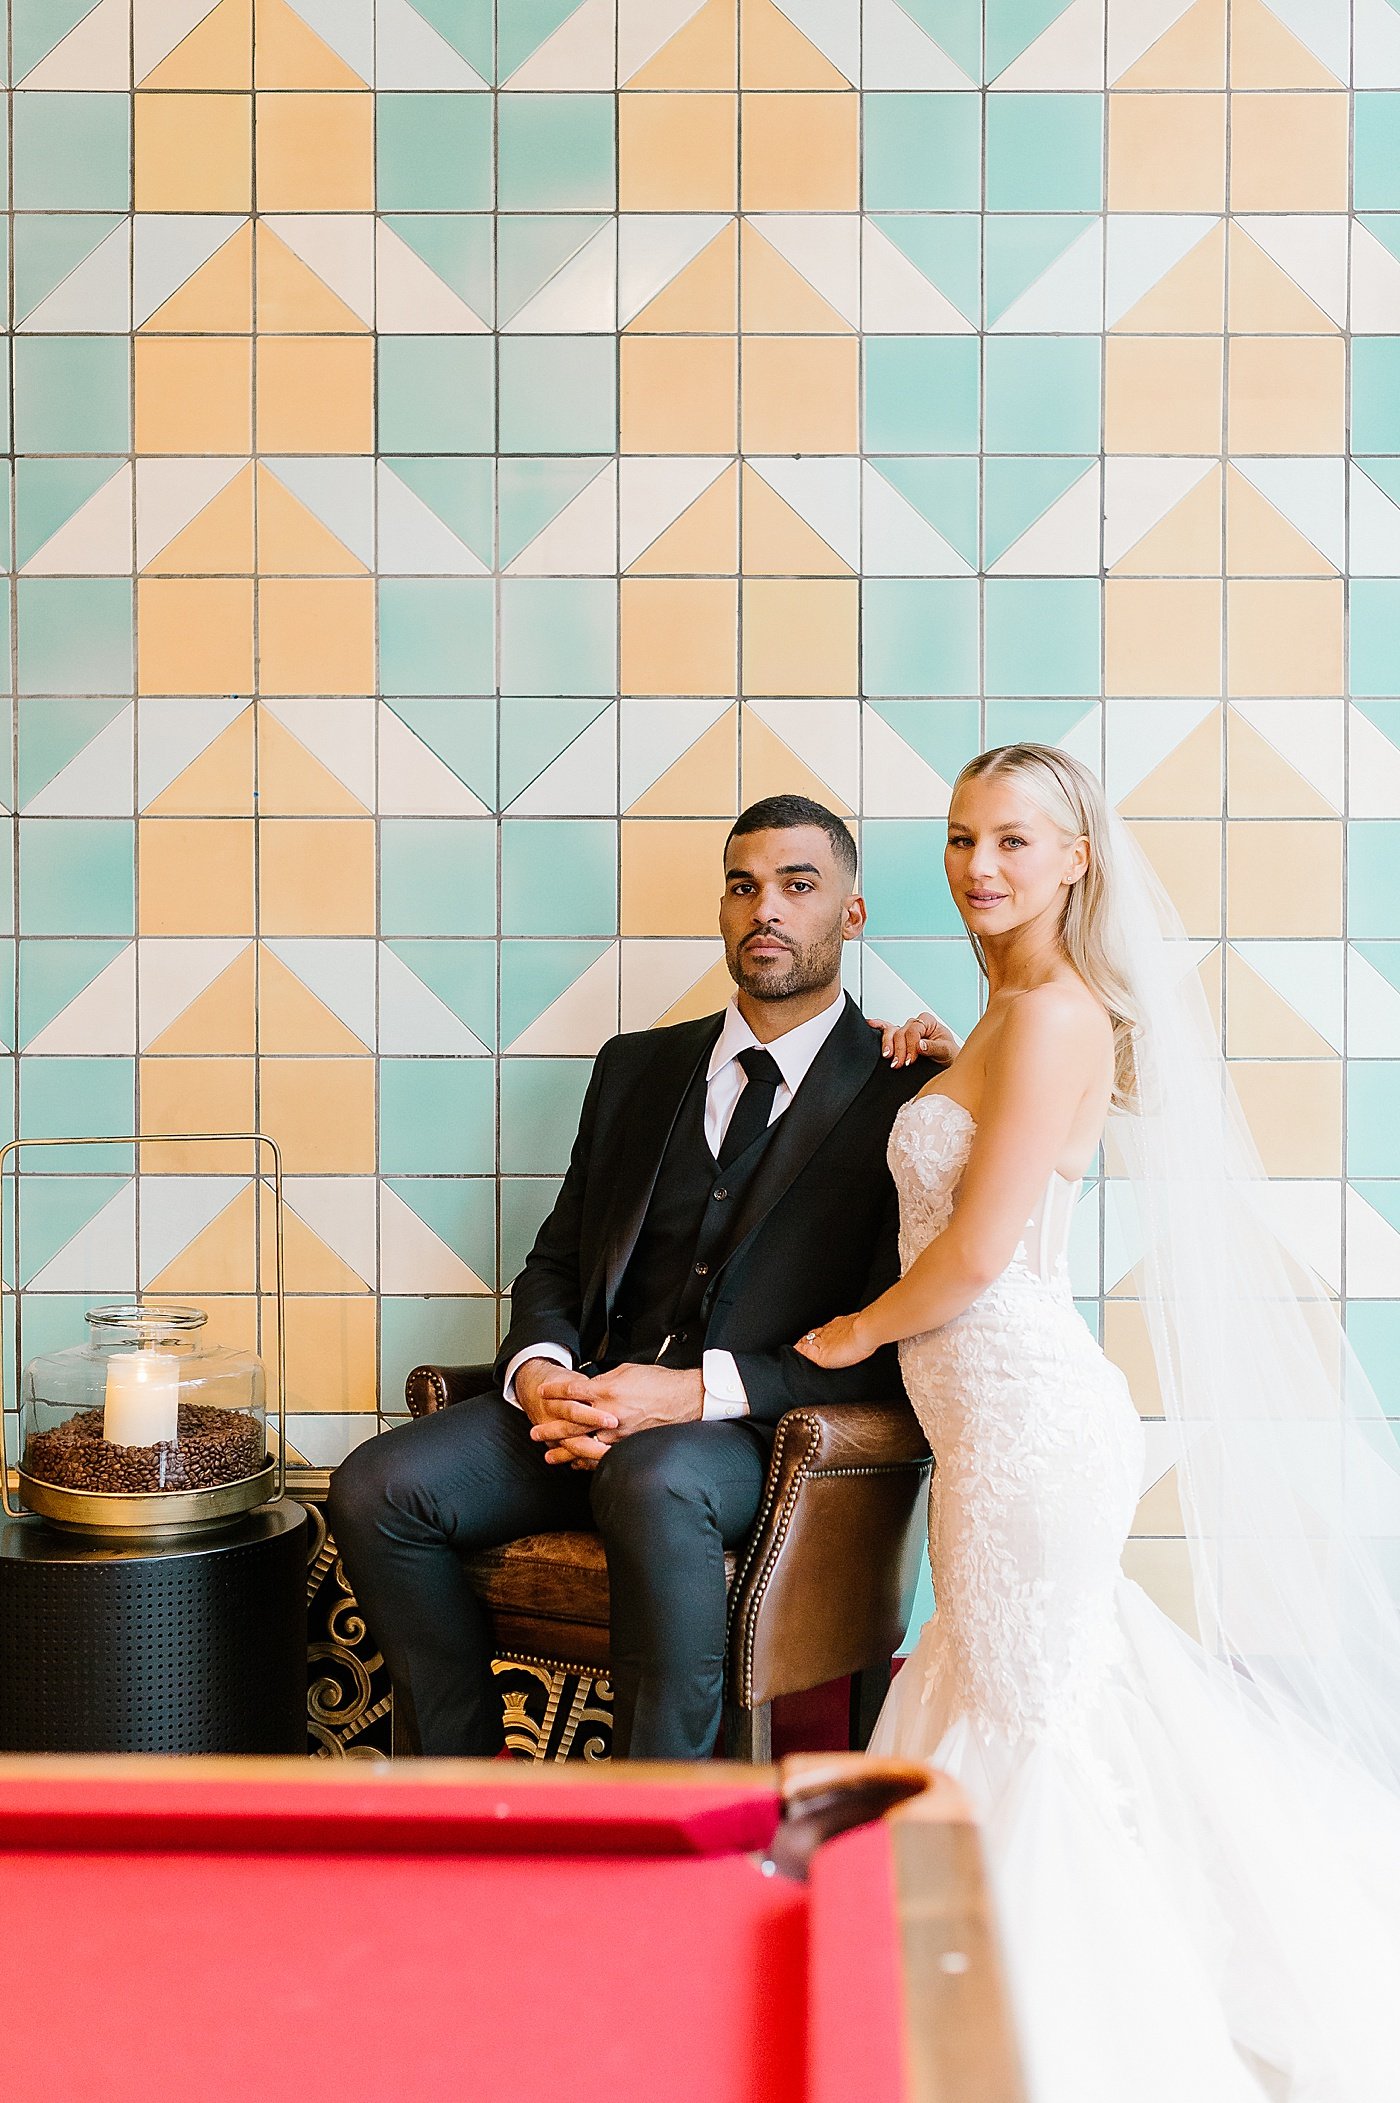 Katie and Micah's Bottleworks Indianapolis Wedding Rebecca Shehorn Photography56.jpg